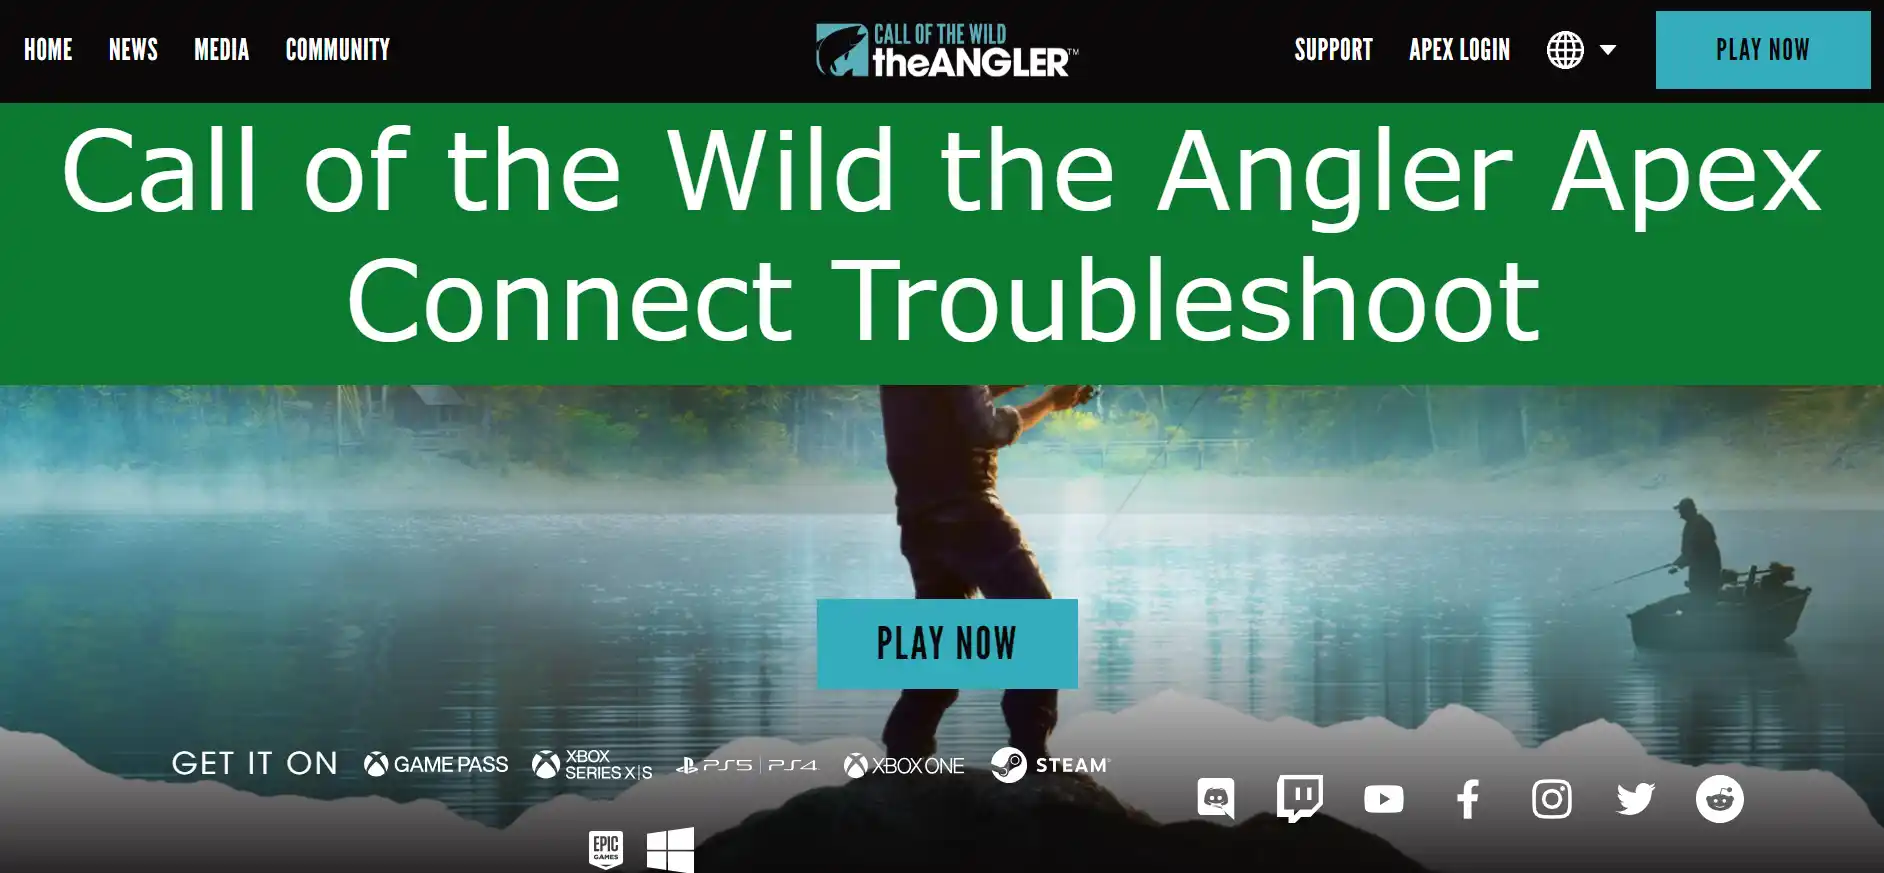 You are currently viewing Call of the Wild the Angler Apex Connect Troubleshoot